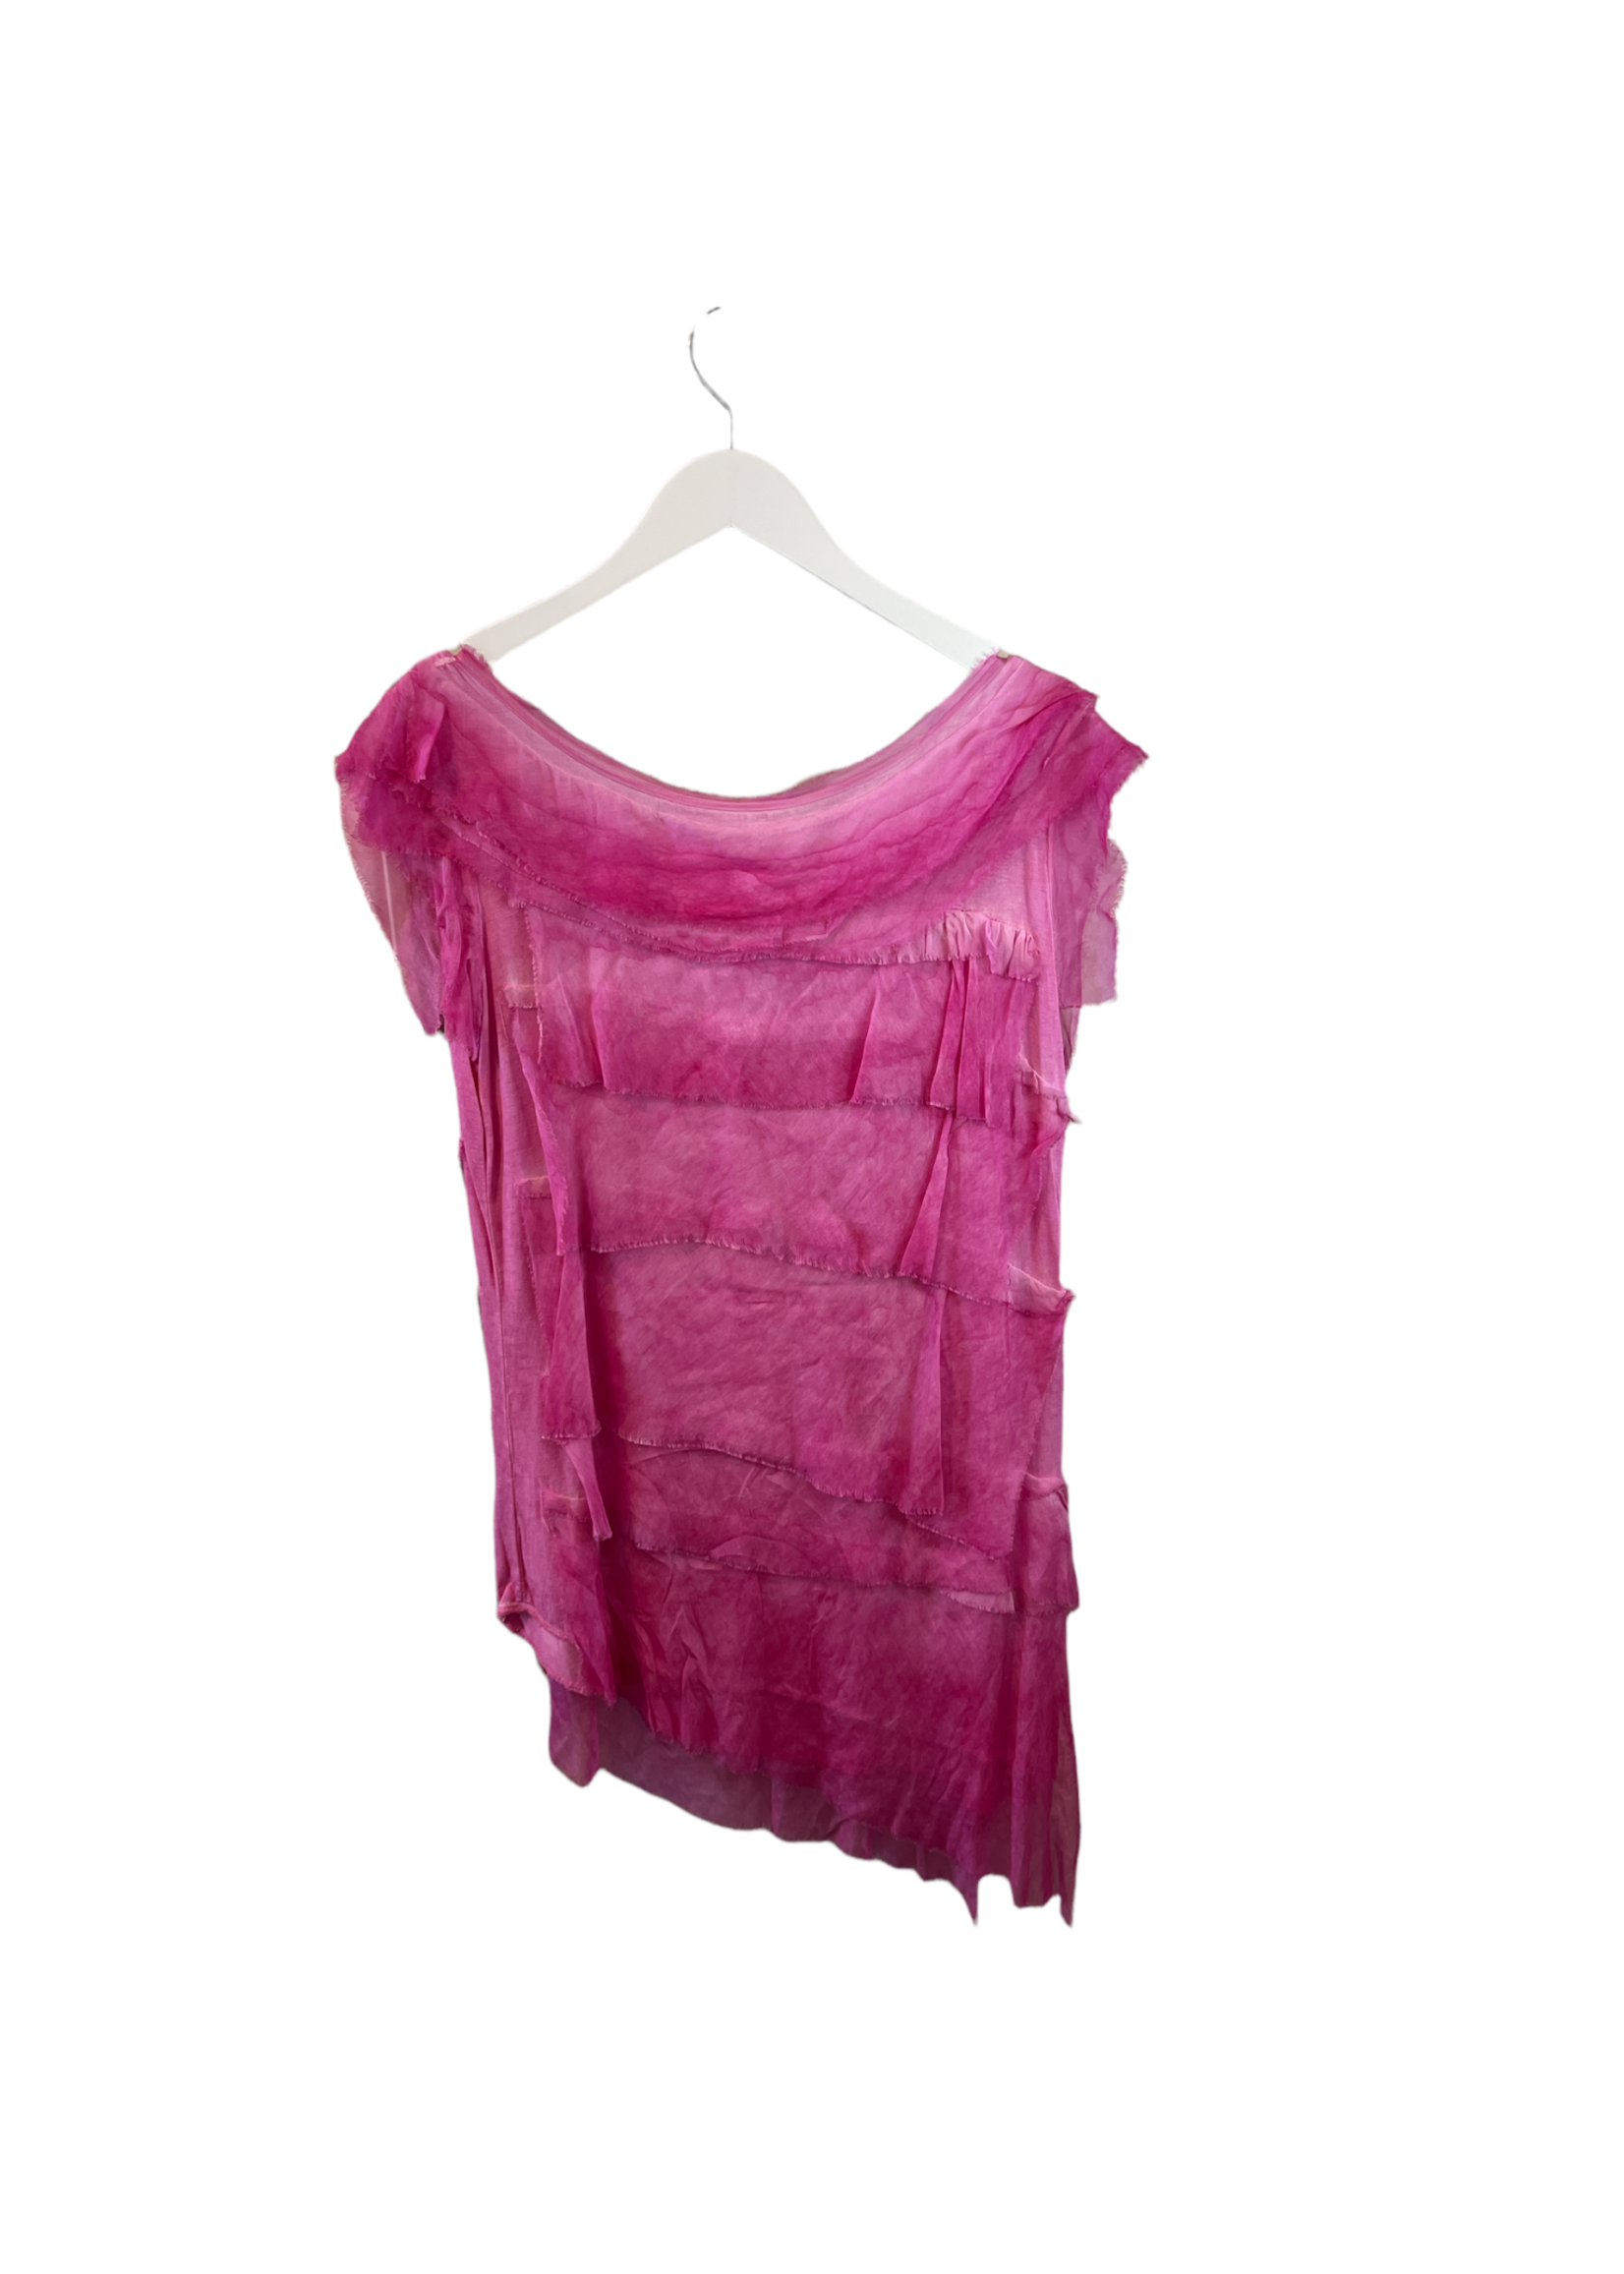 MADE IN ITALY RUFFLE ASYMMETRICAL TOP- SIZE S